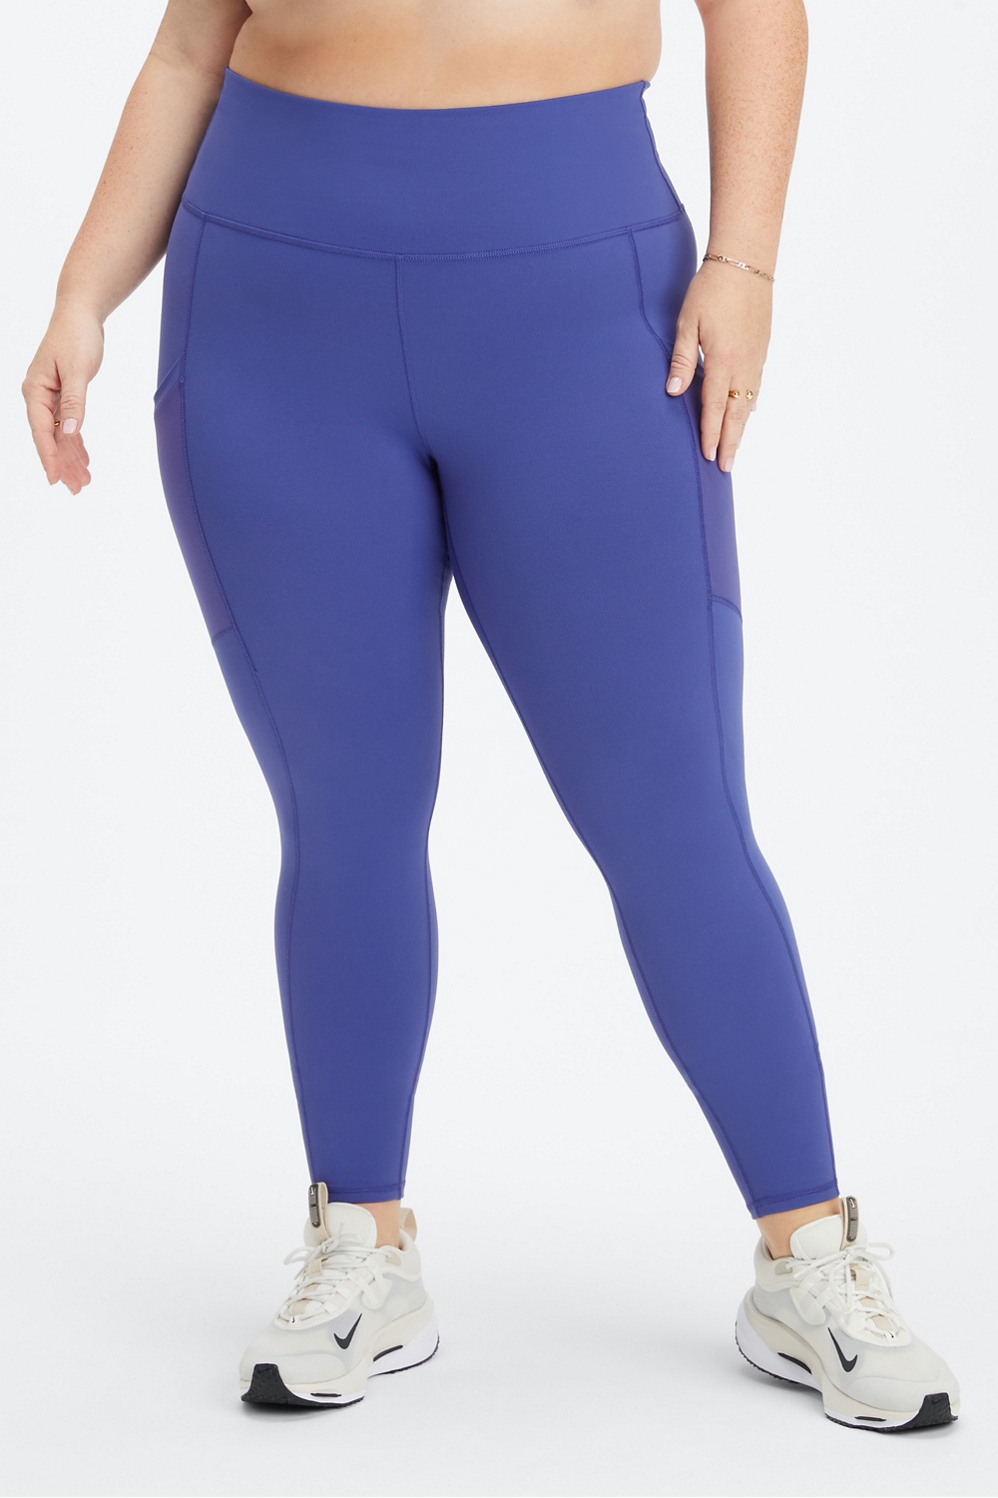 Faded Glory Navy Blue Leggings Size 4X (Plus) - 38% off